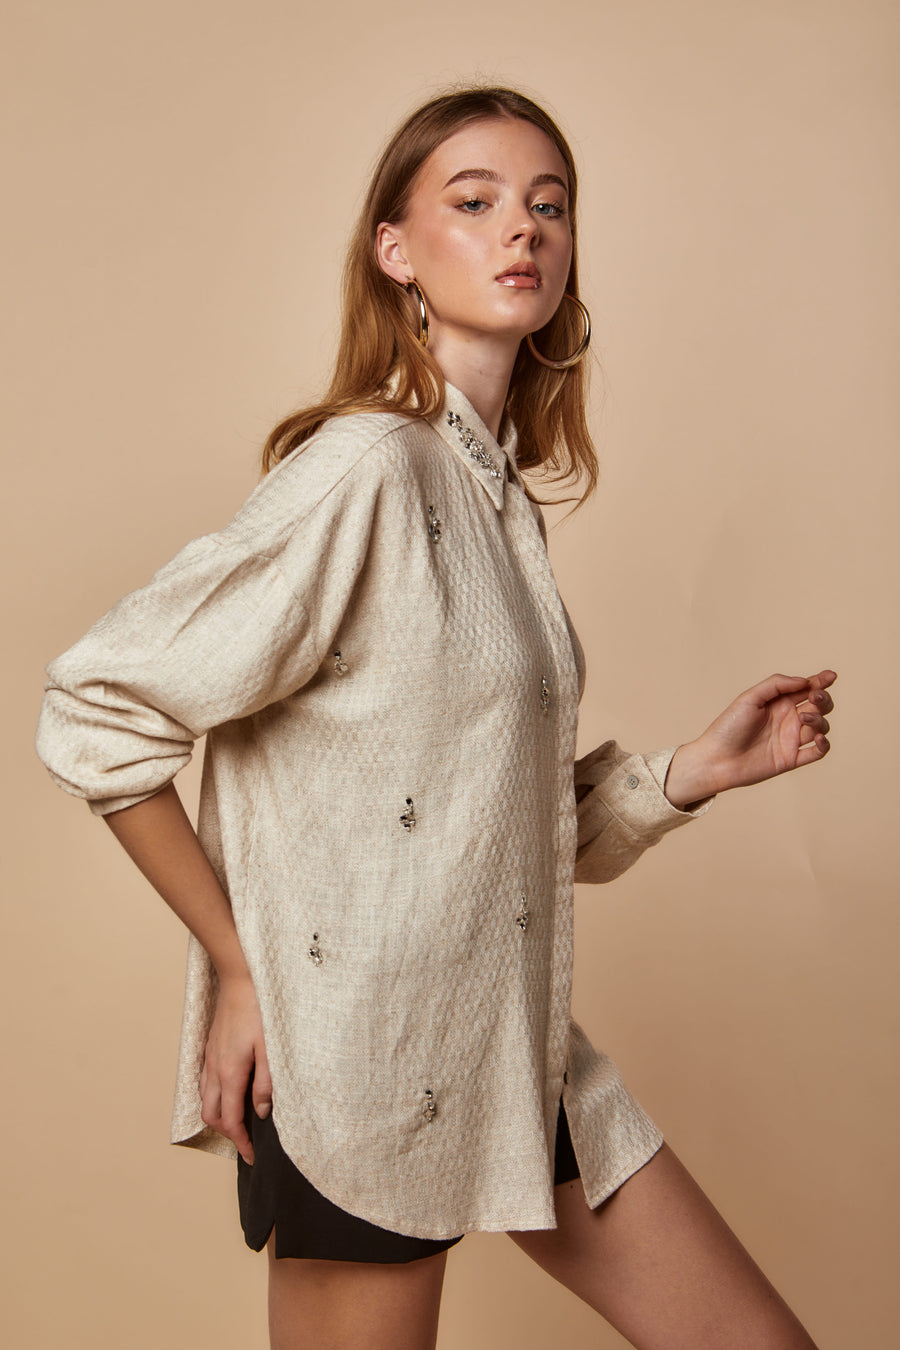 Wool Blended Beige over-shirt with Rhinestones